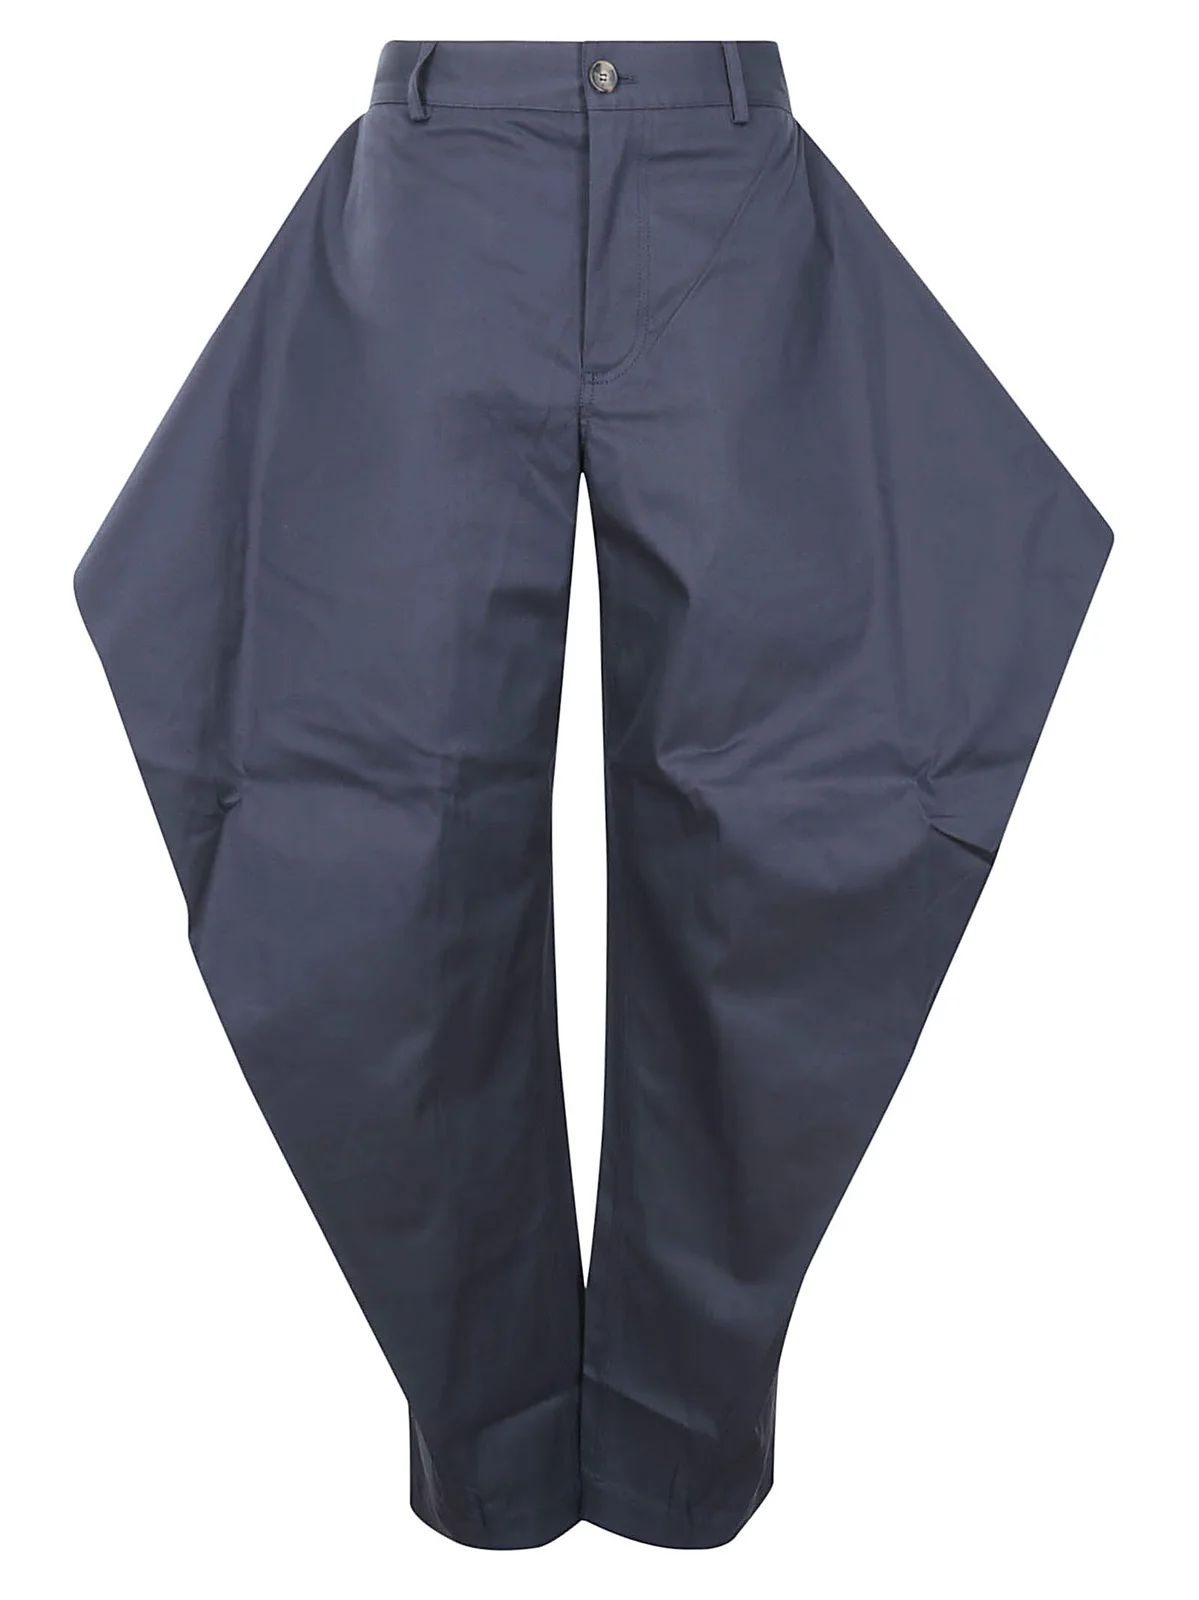 JW Anderson Belted Waist Straight Leg Trousers | Cettire Global